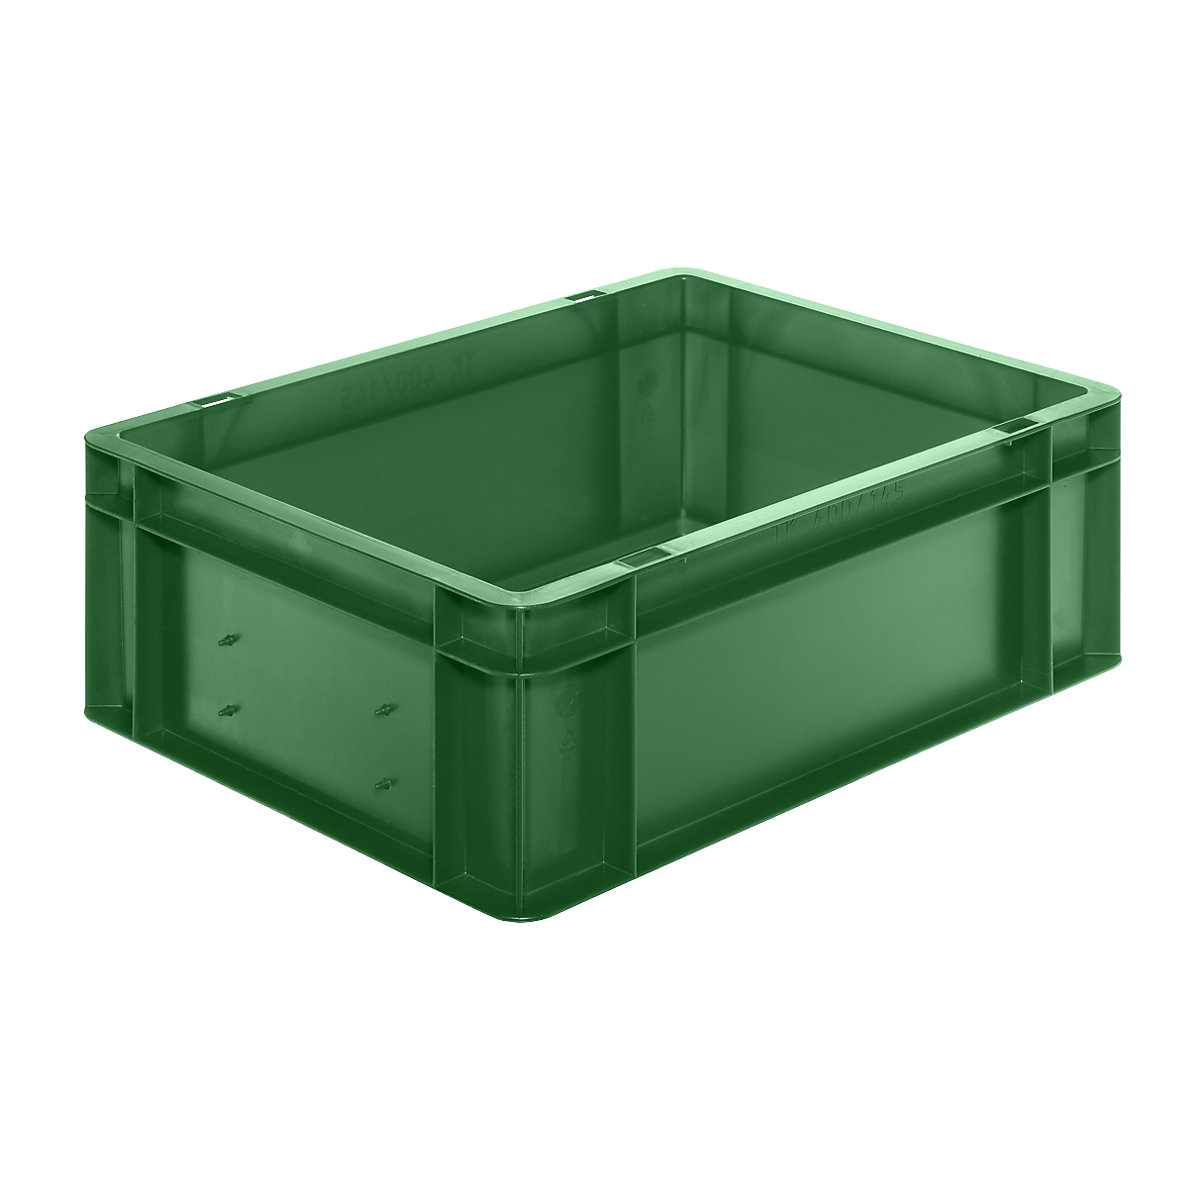 Euro stacking container, closed walls and base, LxWxH 400 x 300 x 145 mm, green, pack of 5